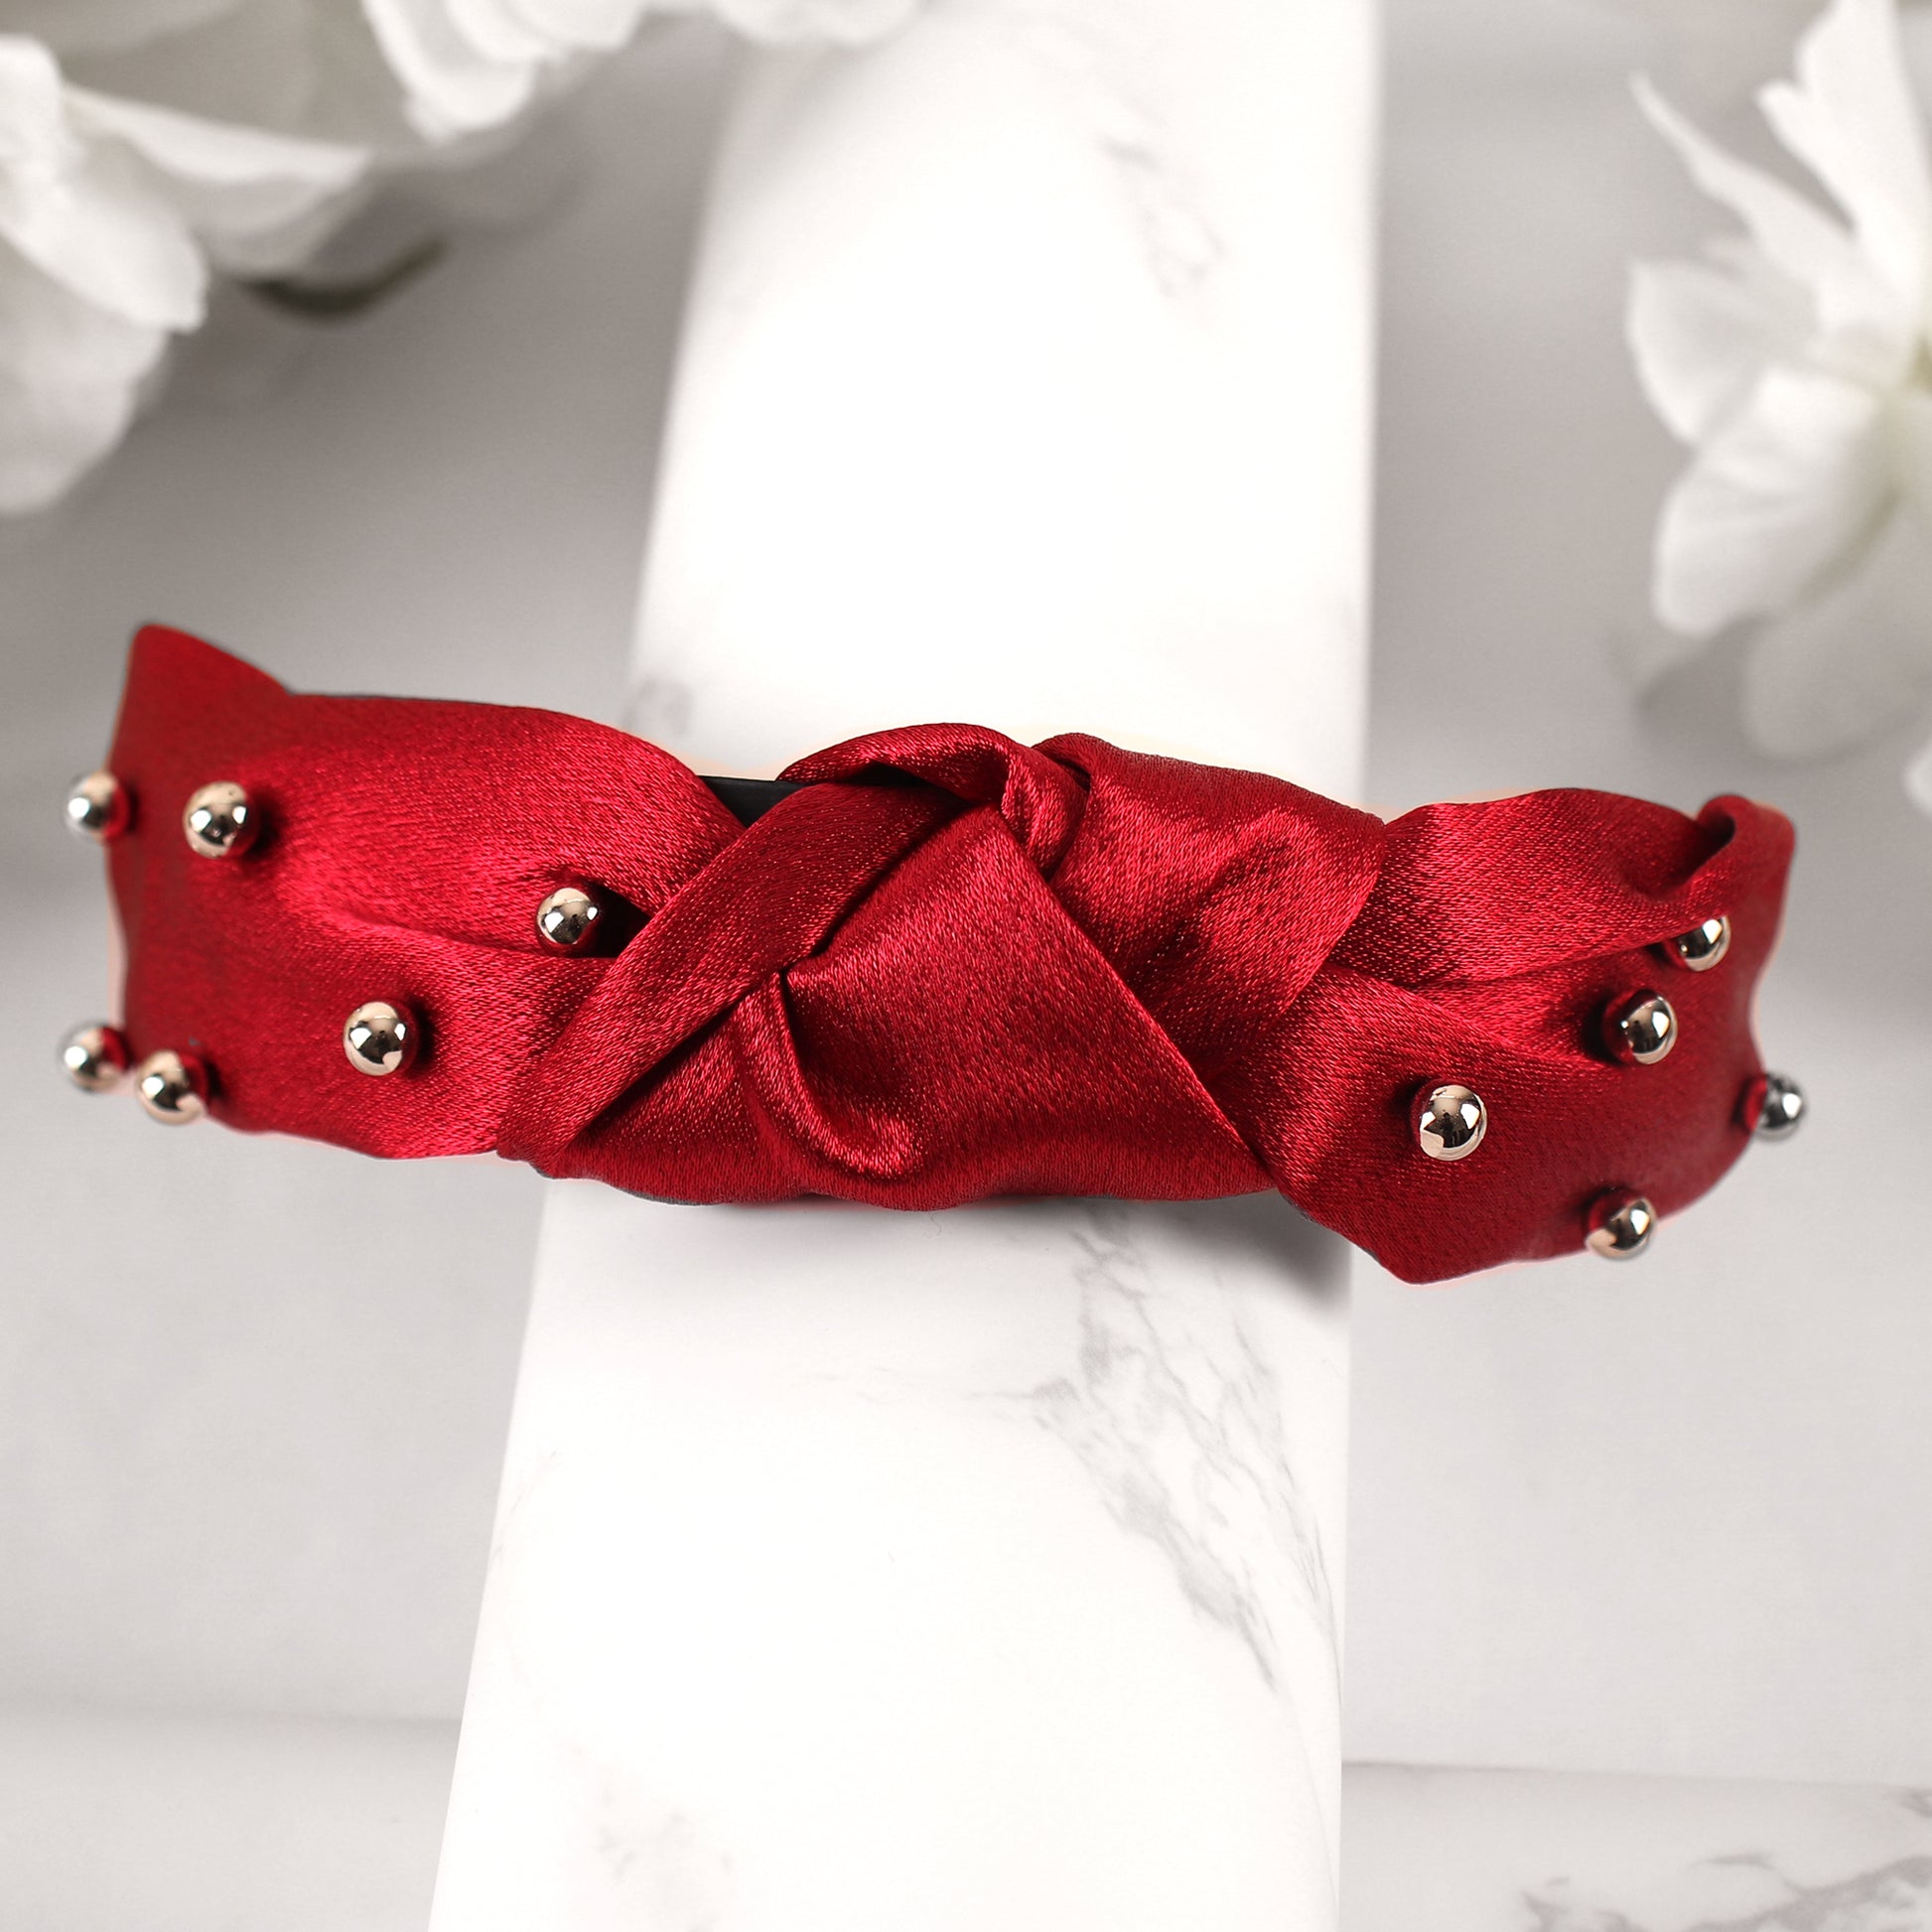 HairBand,The Hair Flair Satin Hair Band in Red - Cippele Multi Store